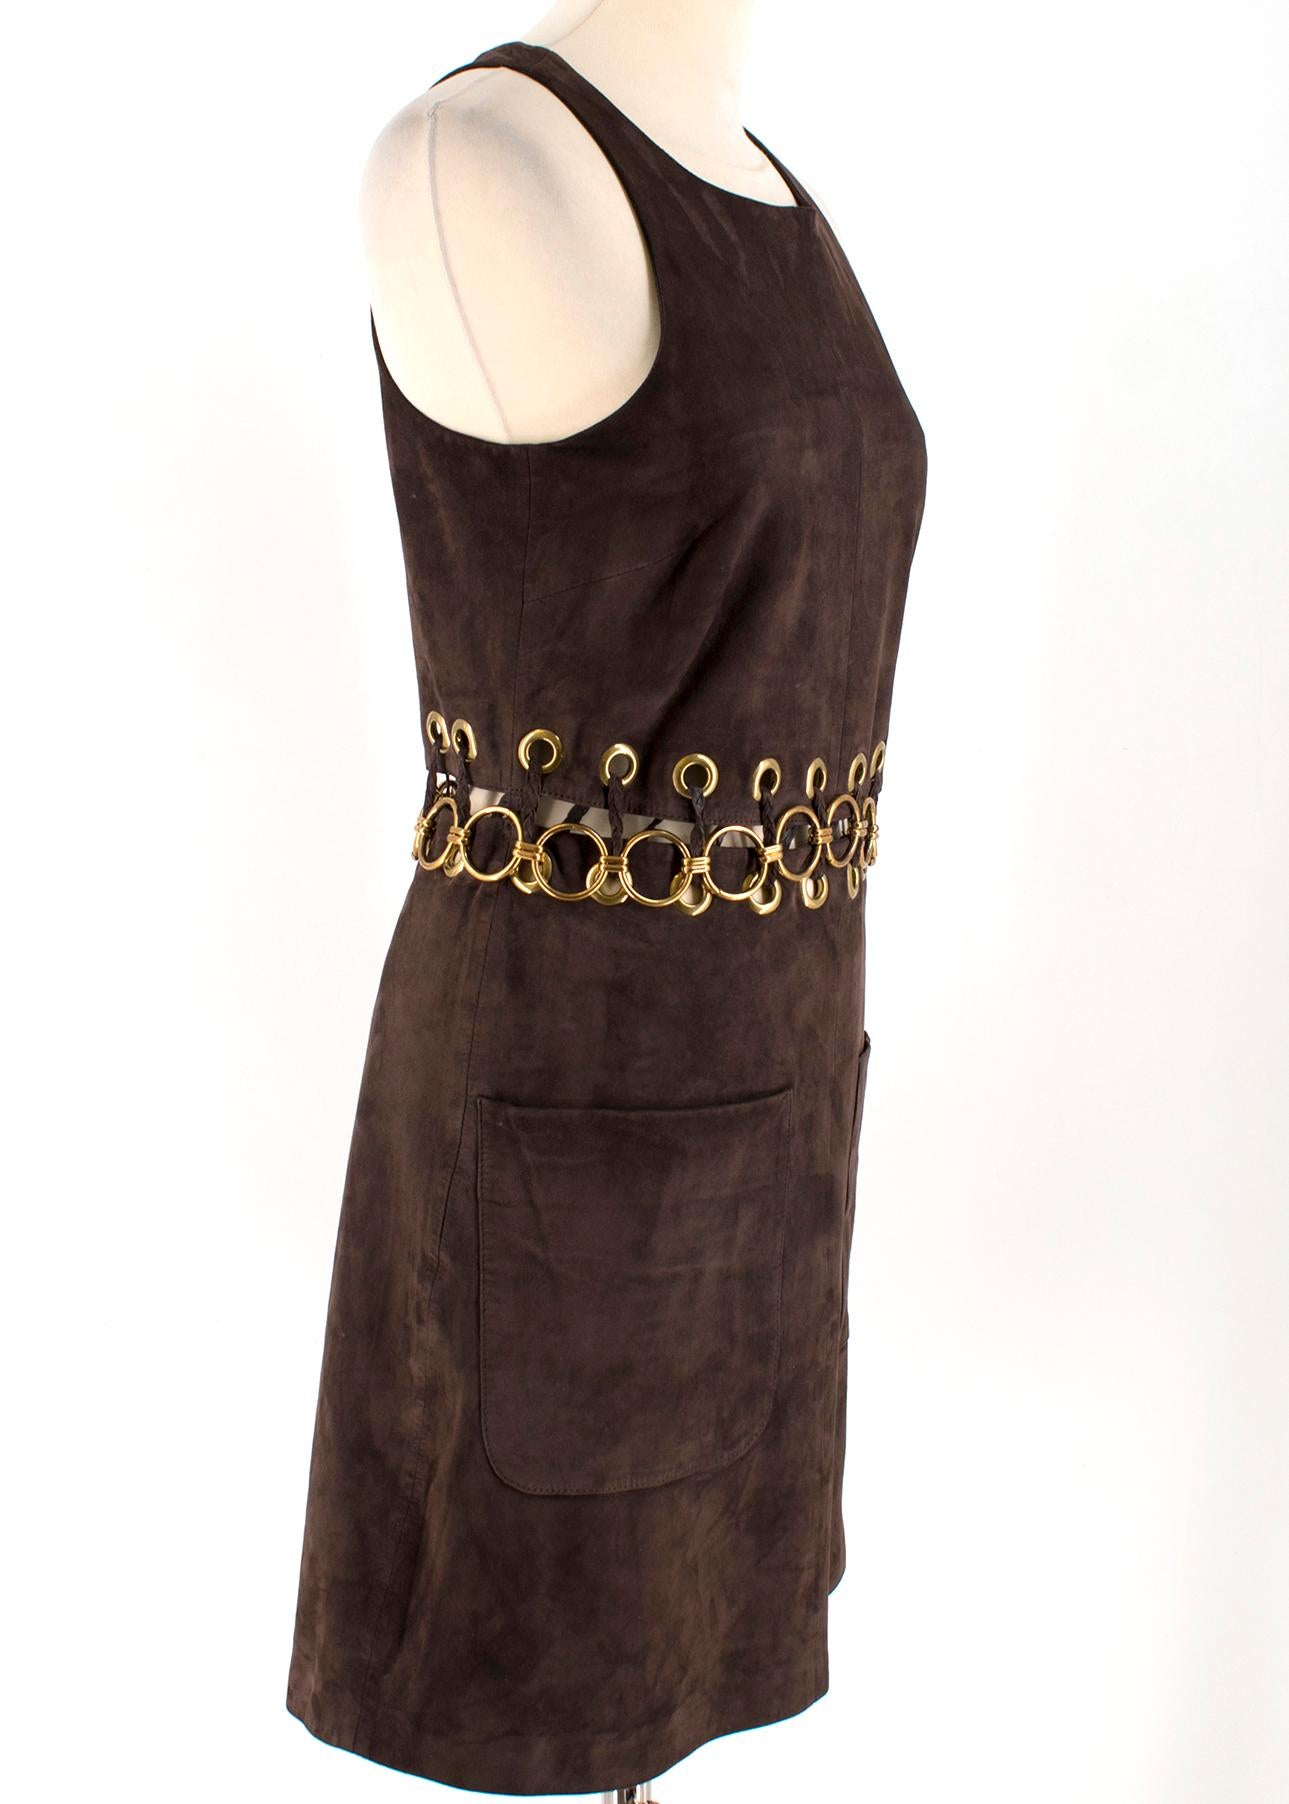 Chloe Brown Suede Eyelet Cut-Out Mini Dress

-Brown, 100% lambskin leather
-Sleeveless
-Gold Circular hardware at waist with openings
-Two functional front pockets
-Concealed zip back closure
-100% cotton lining

Please note, these items are